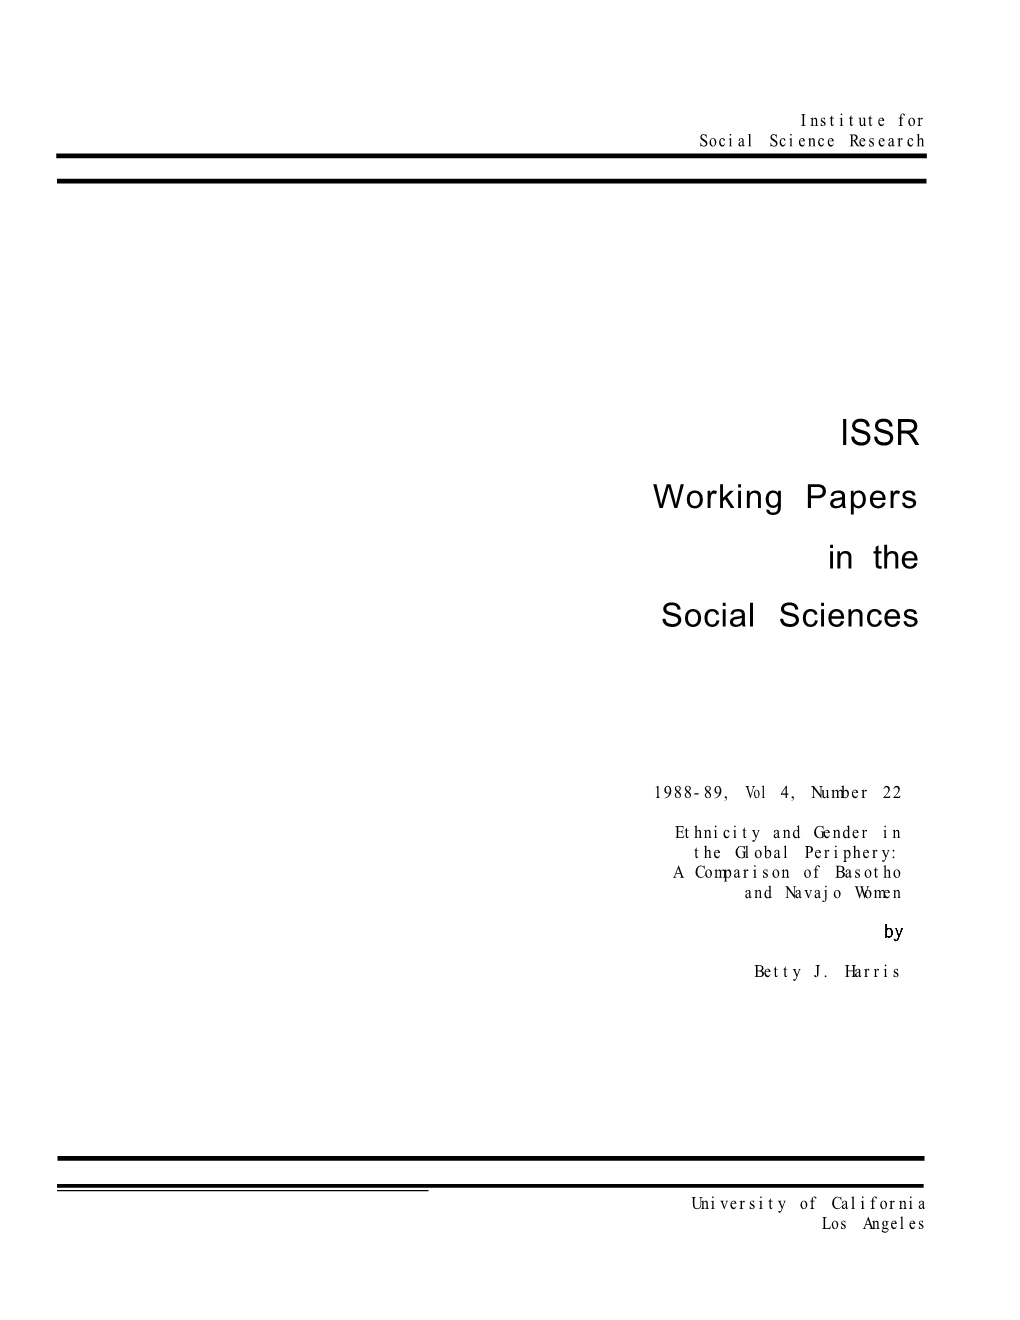 Working Papers in the Social Sciences